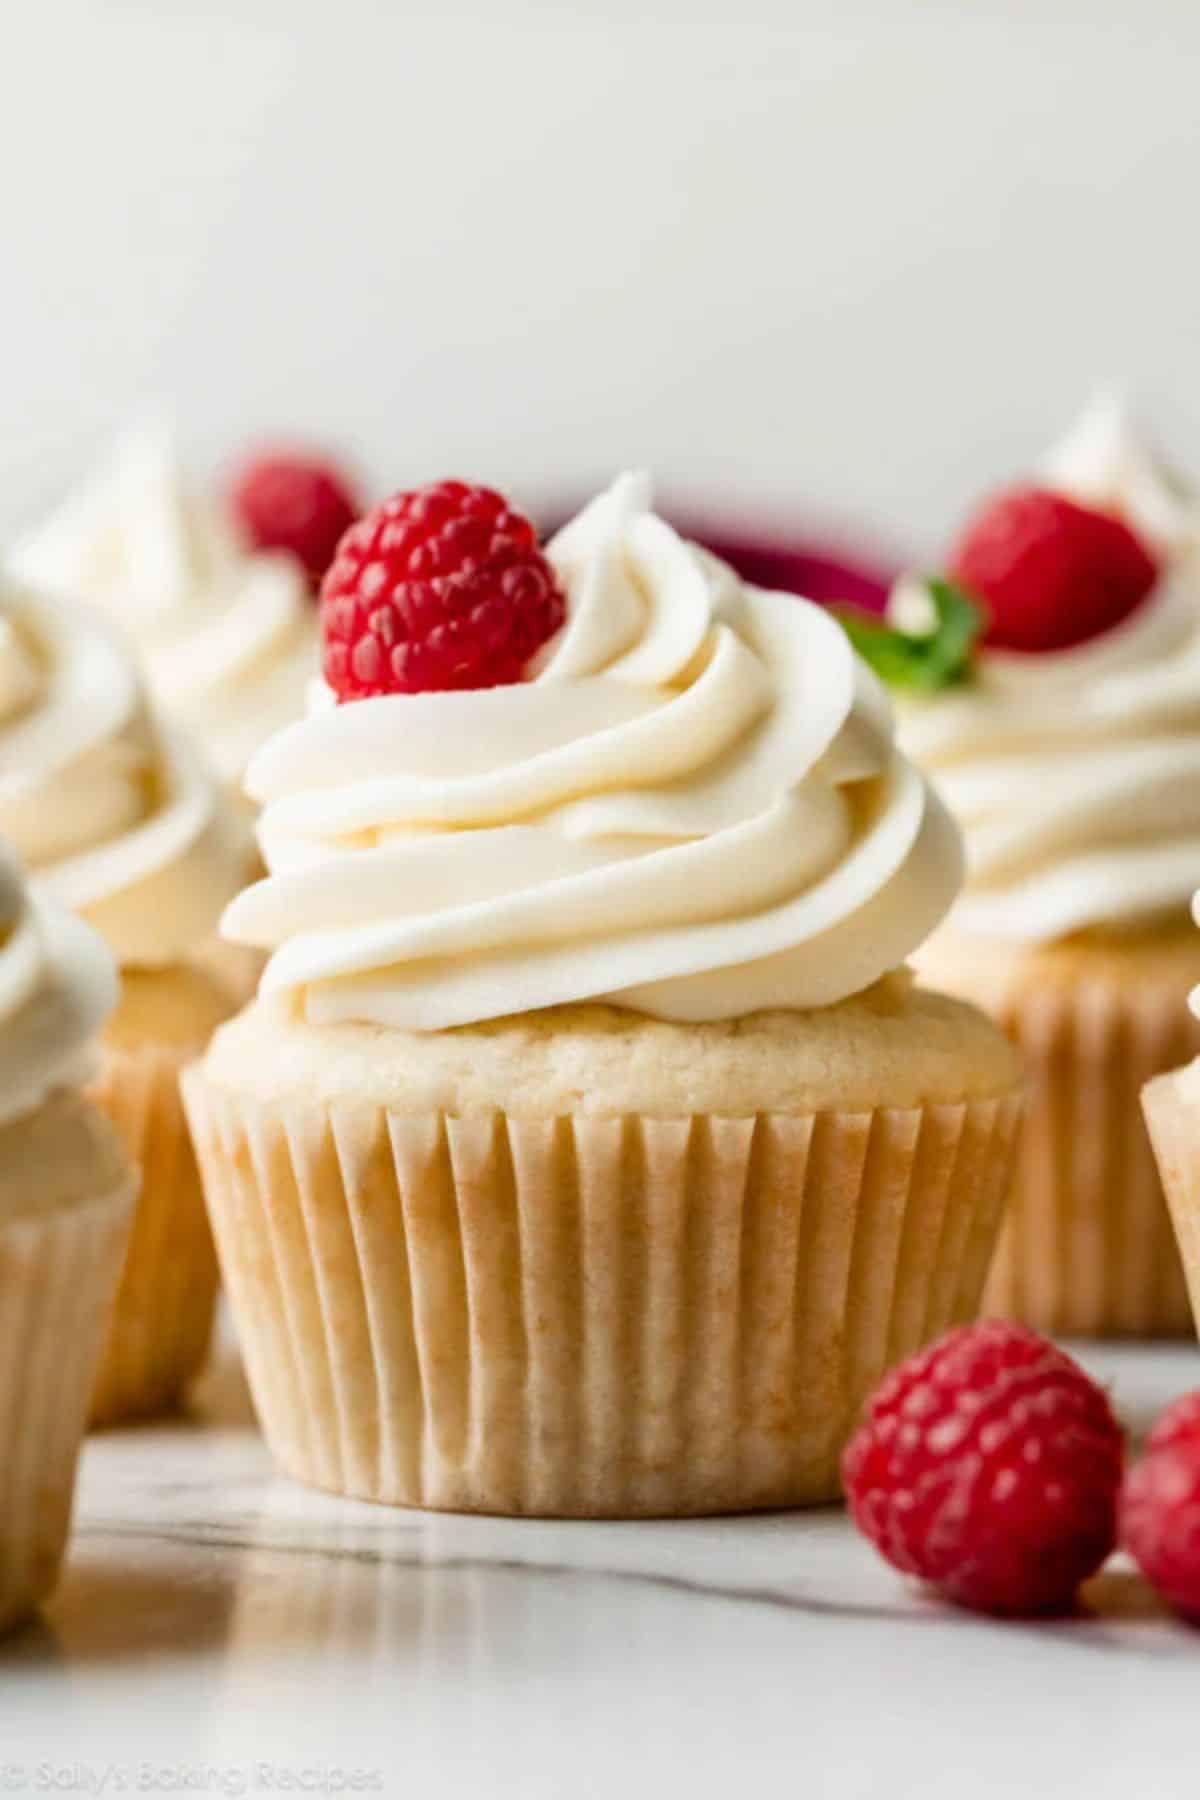 Cupcakes with White Chocolate Buttercream Frosting.